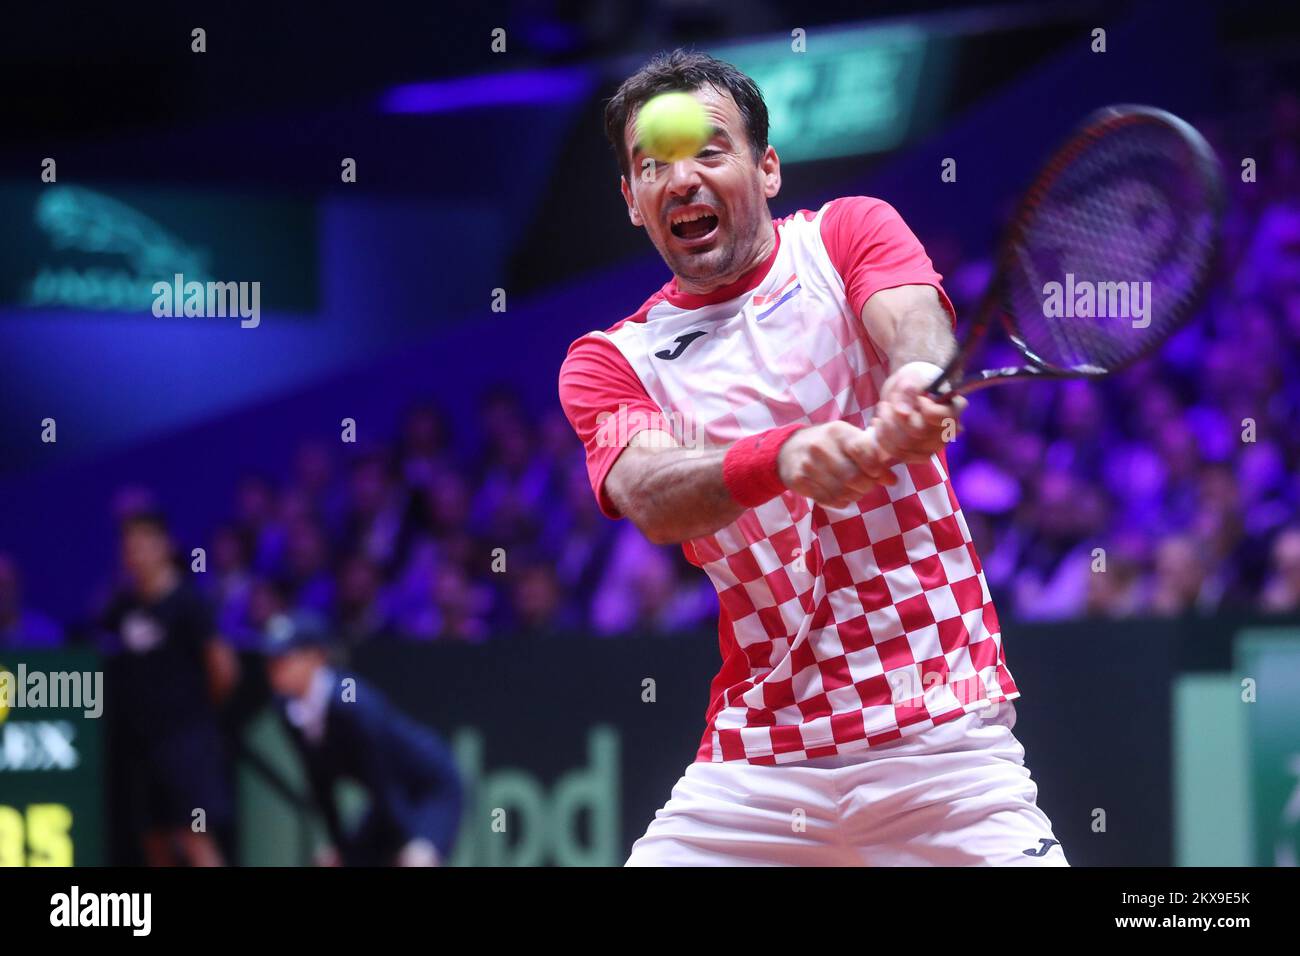 24.11.2018., Lillie, France - Ivan Dodig of Croatia compete during the  doubles match match against Pierre-Hugues Herbert and Nicolas Mahut of  France at Davis Cup Final between France and Croatia at stadium